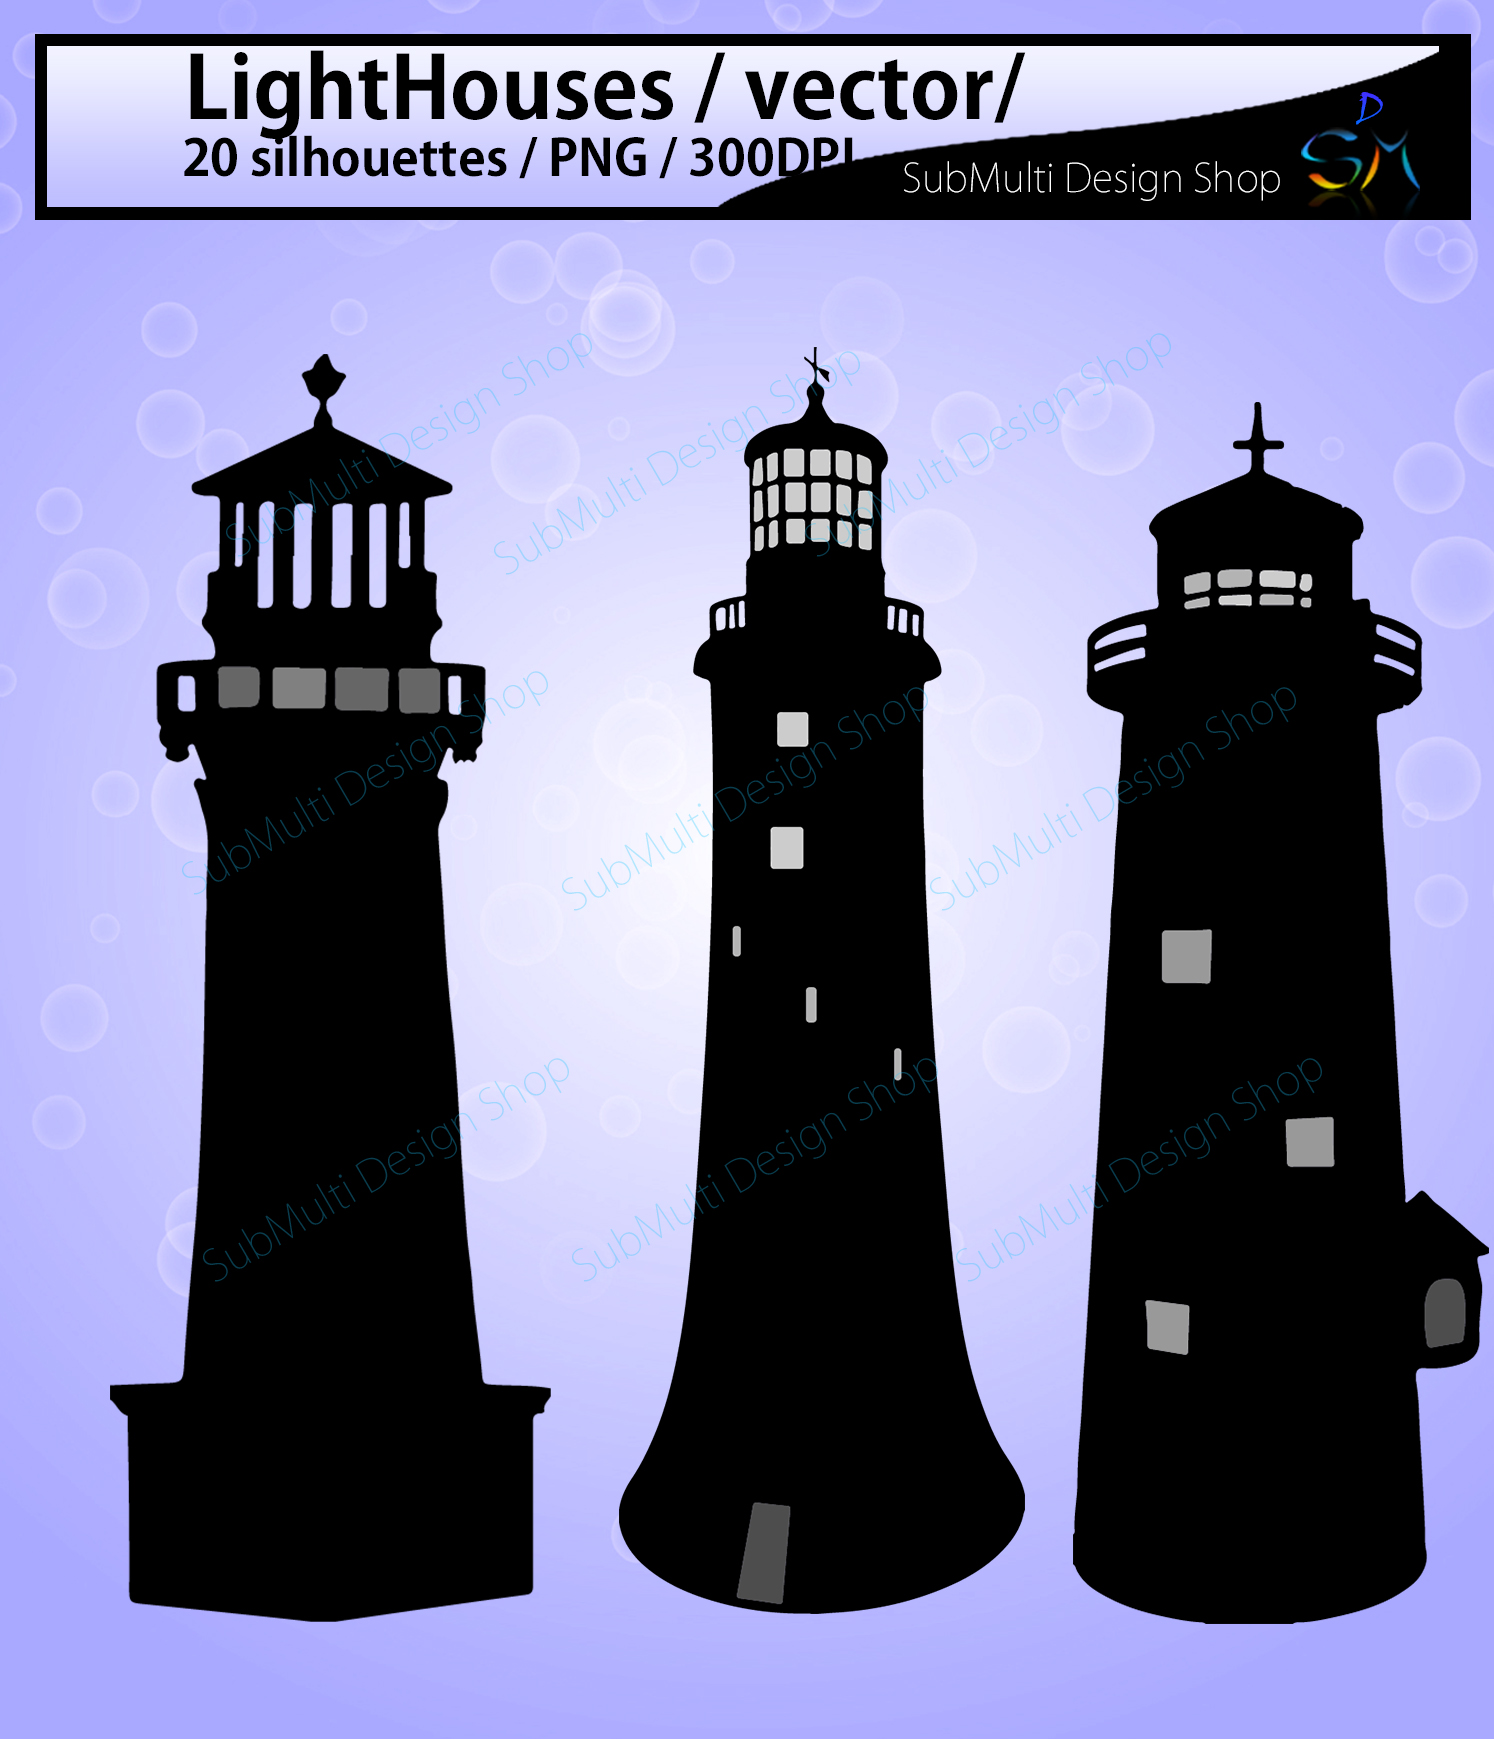 Download LightHouses silhouette SVG / EPS / PNG / DXf / LightHouse ...